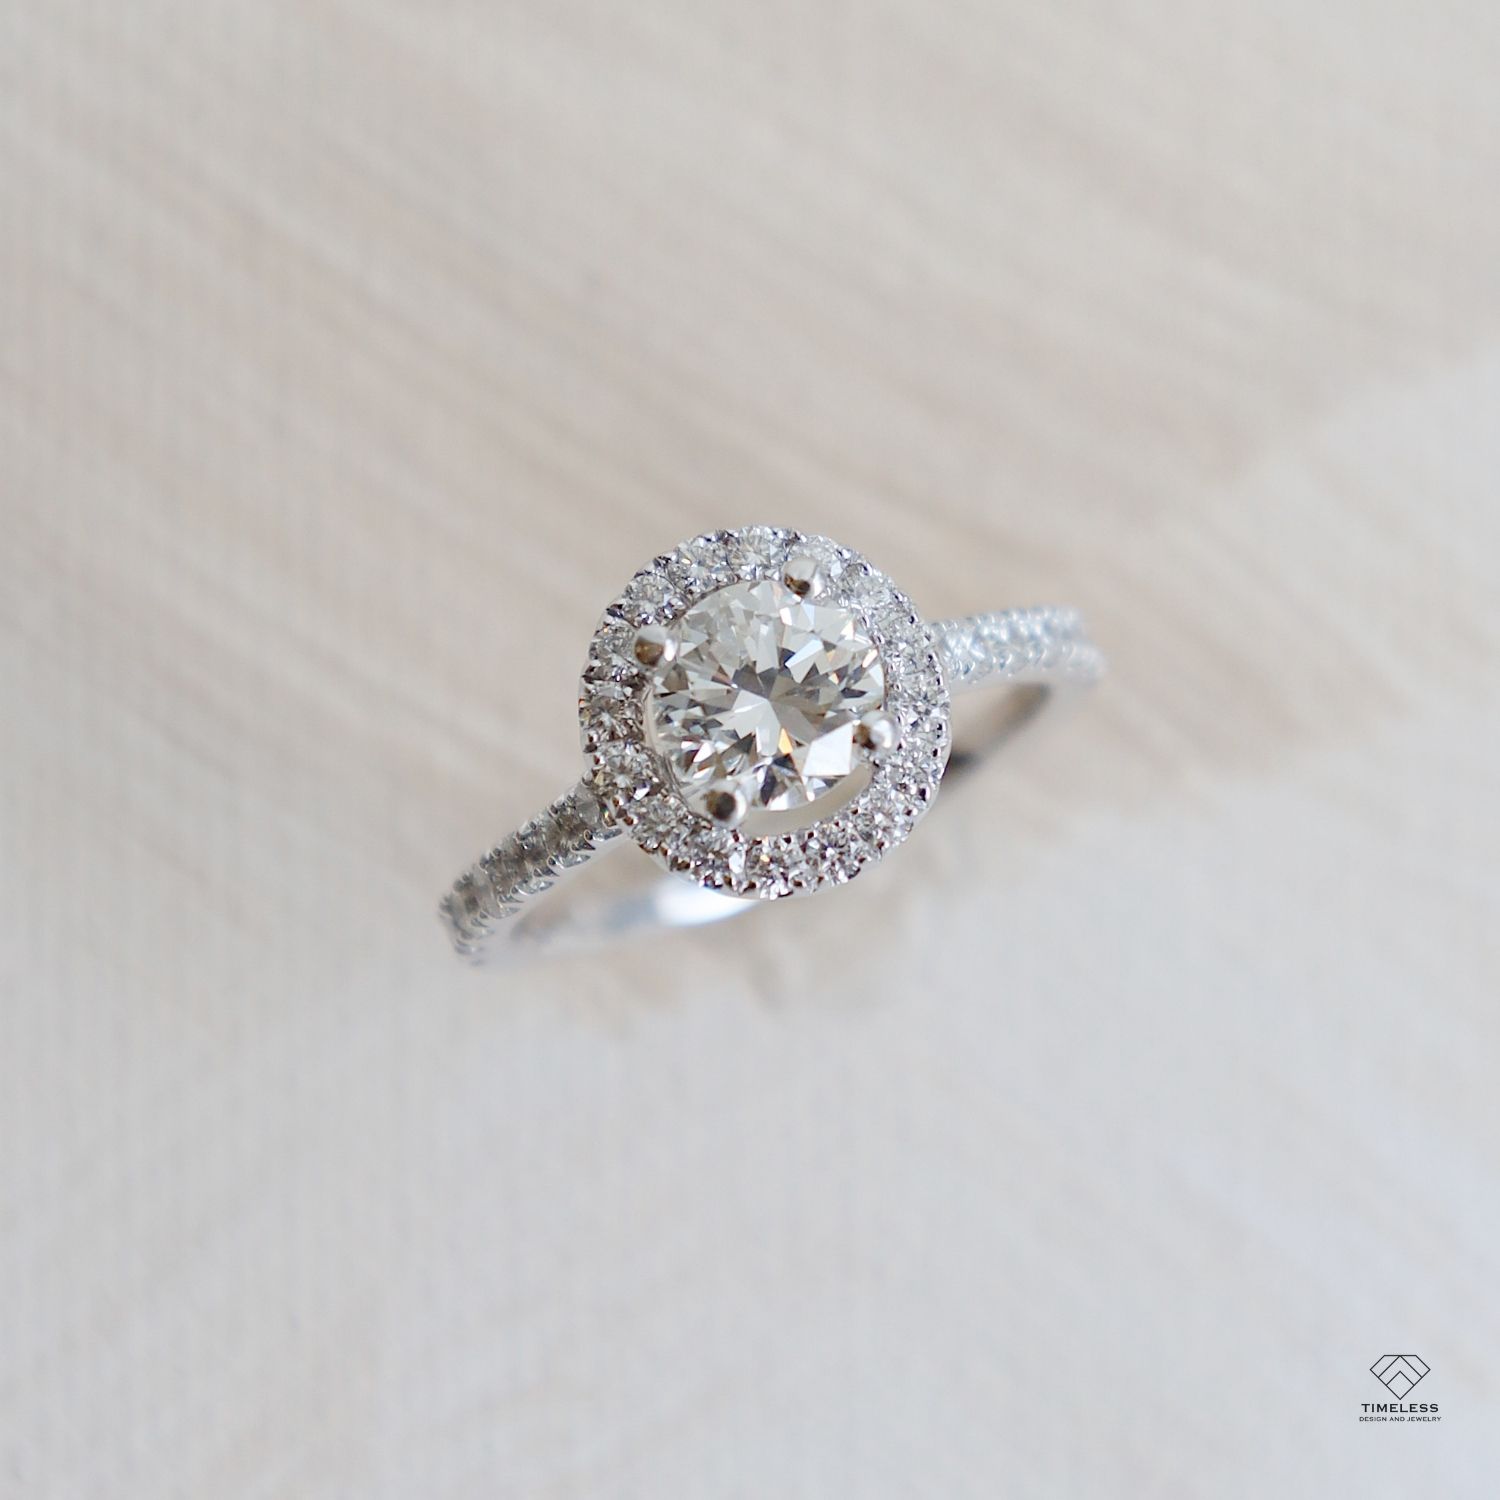 Custom Round Brilliant Cut Diamond Engagement Ring in Salt Lake City by Timeless Design and Jewelry